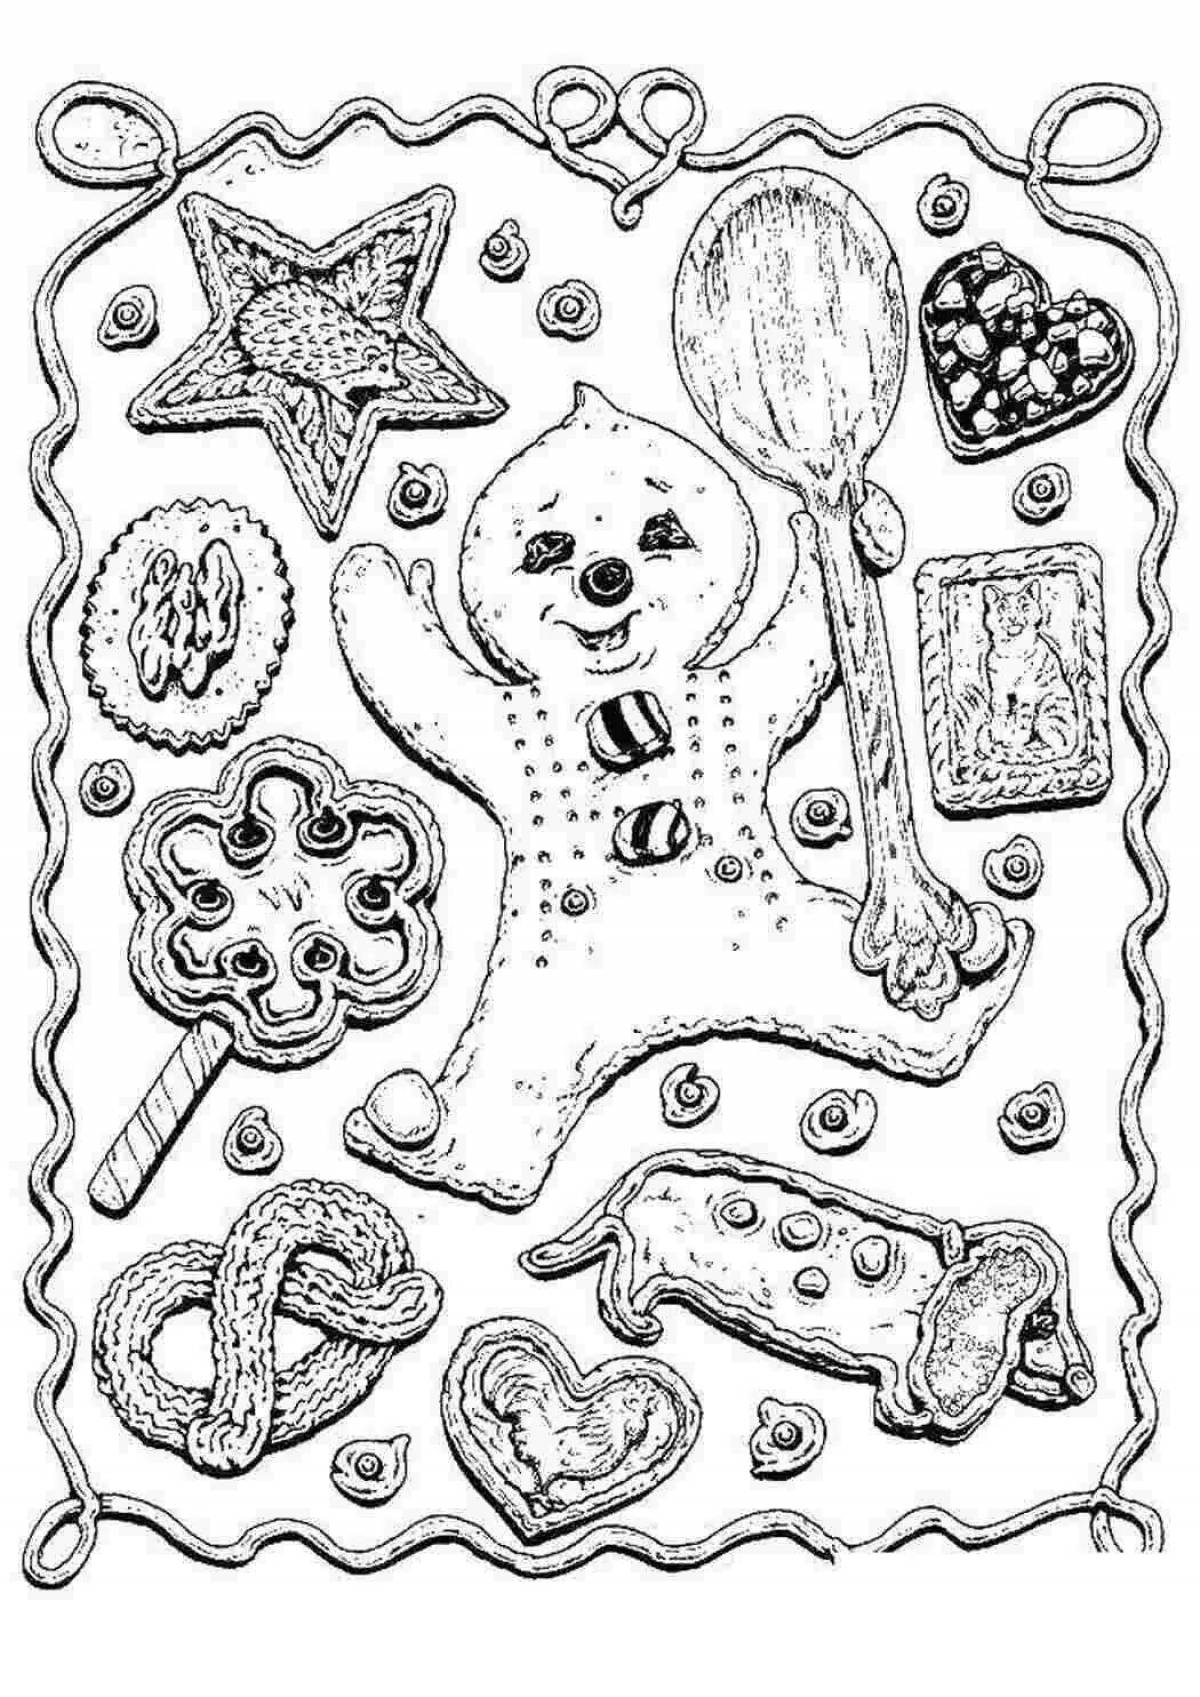 Coloring page amazing Tula gingerbread